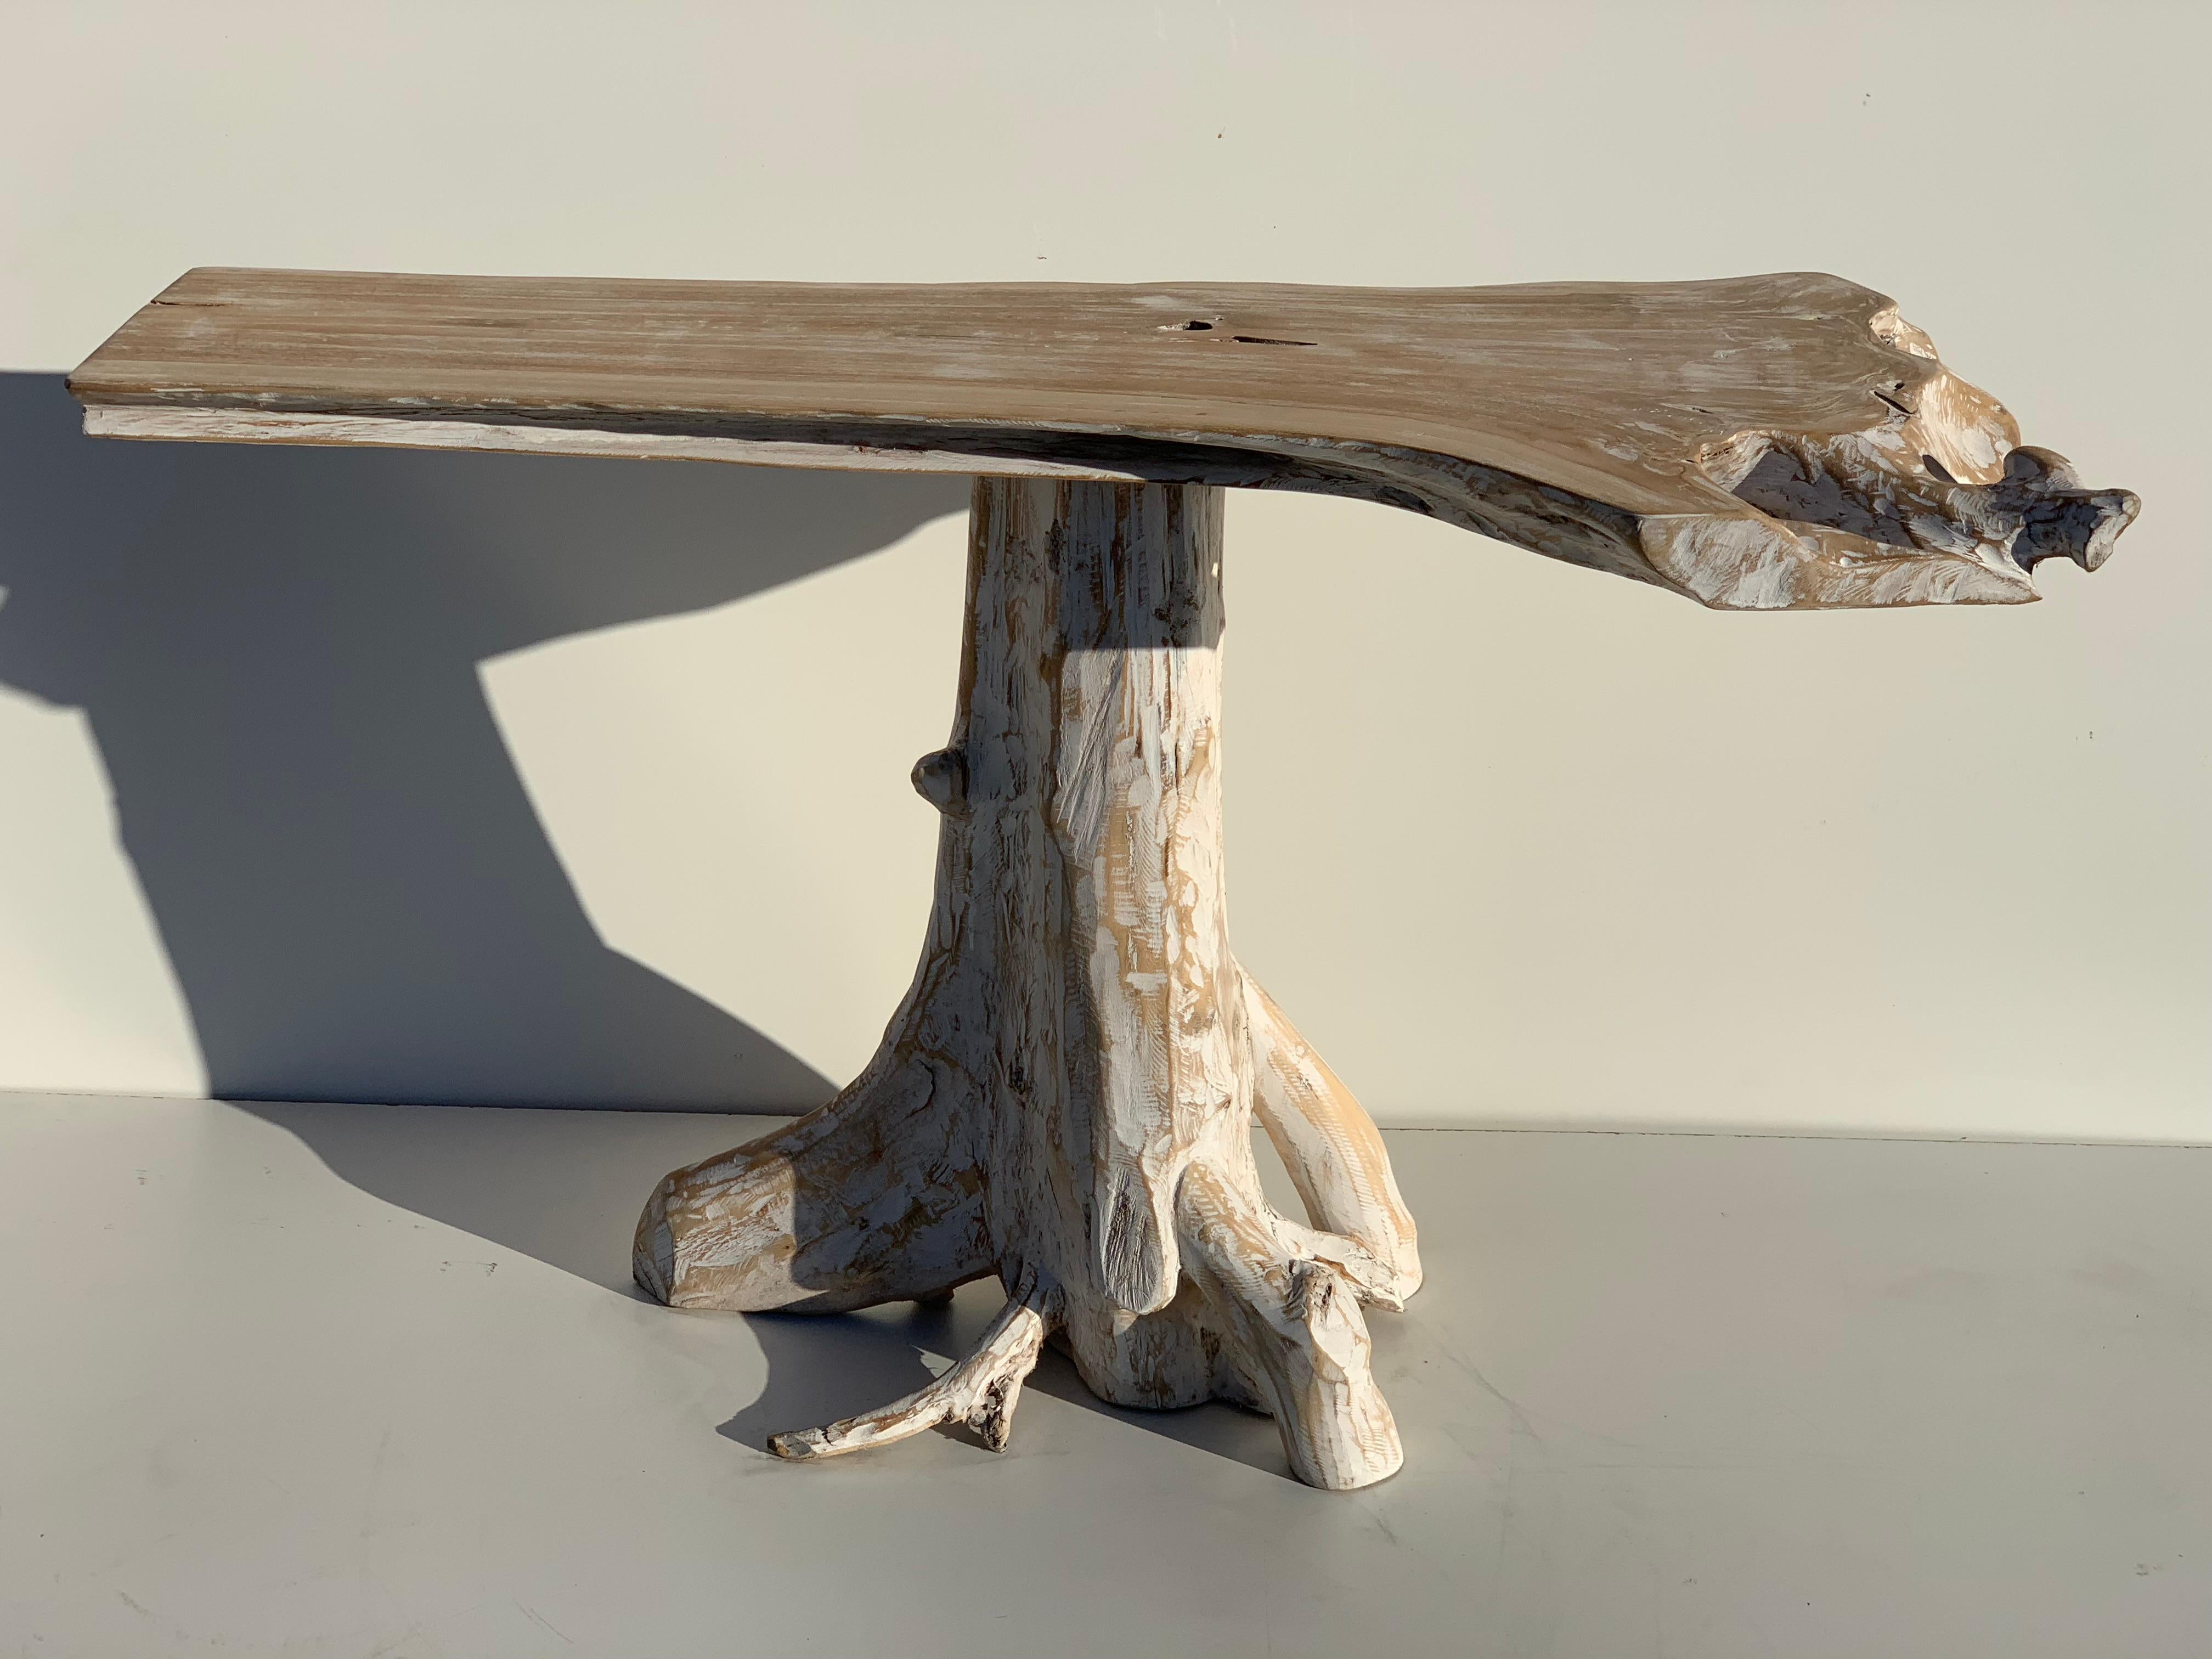 Teak root console sofa table in white wash finish. Top measures 22